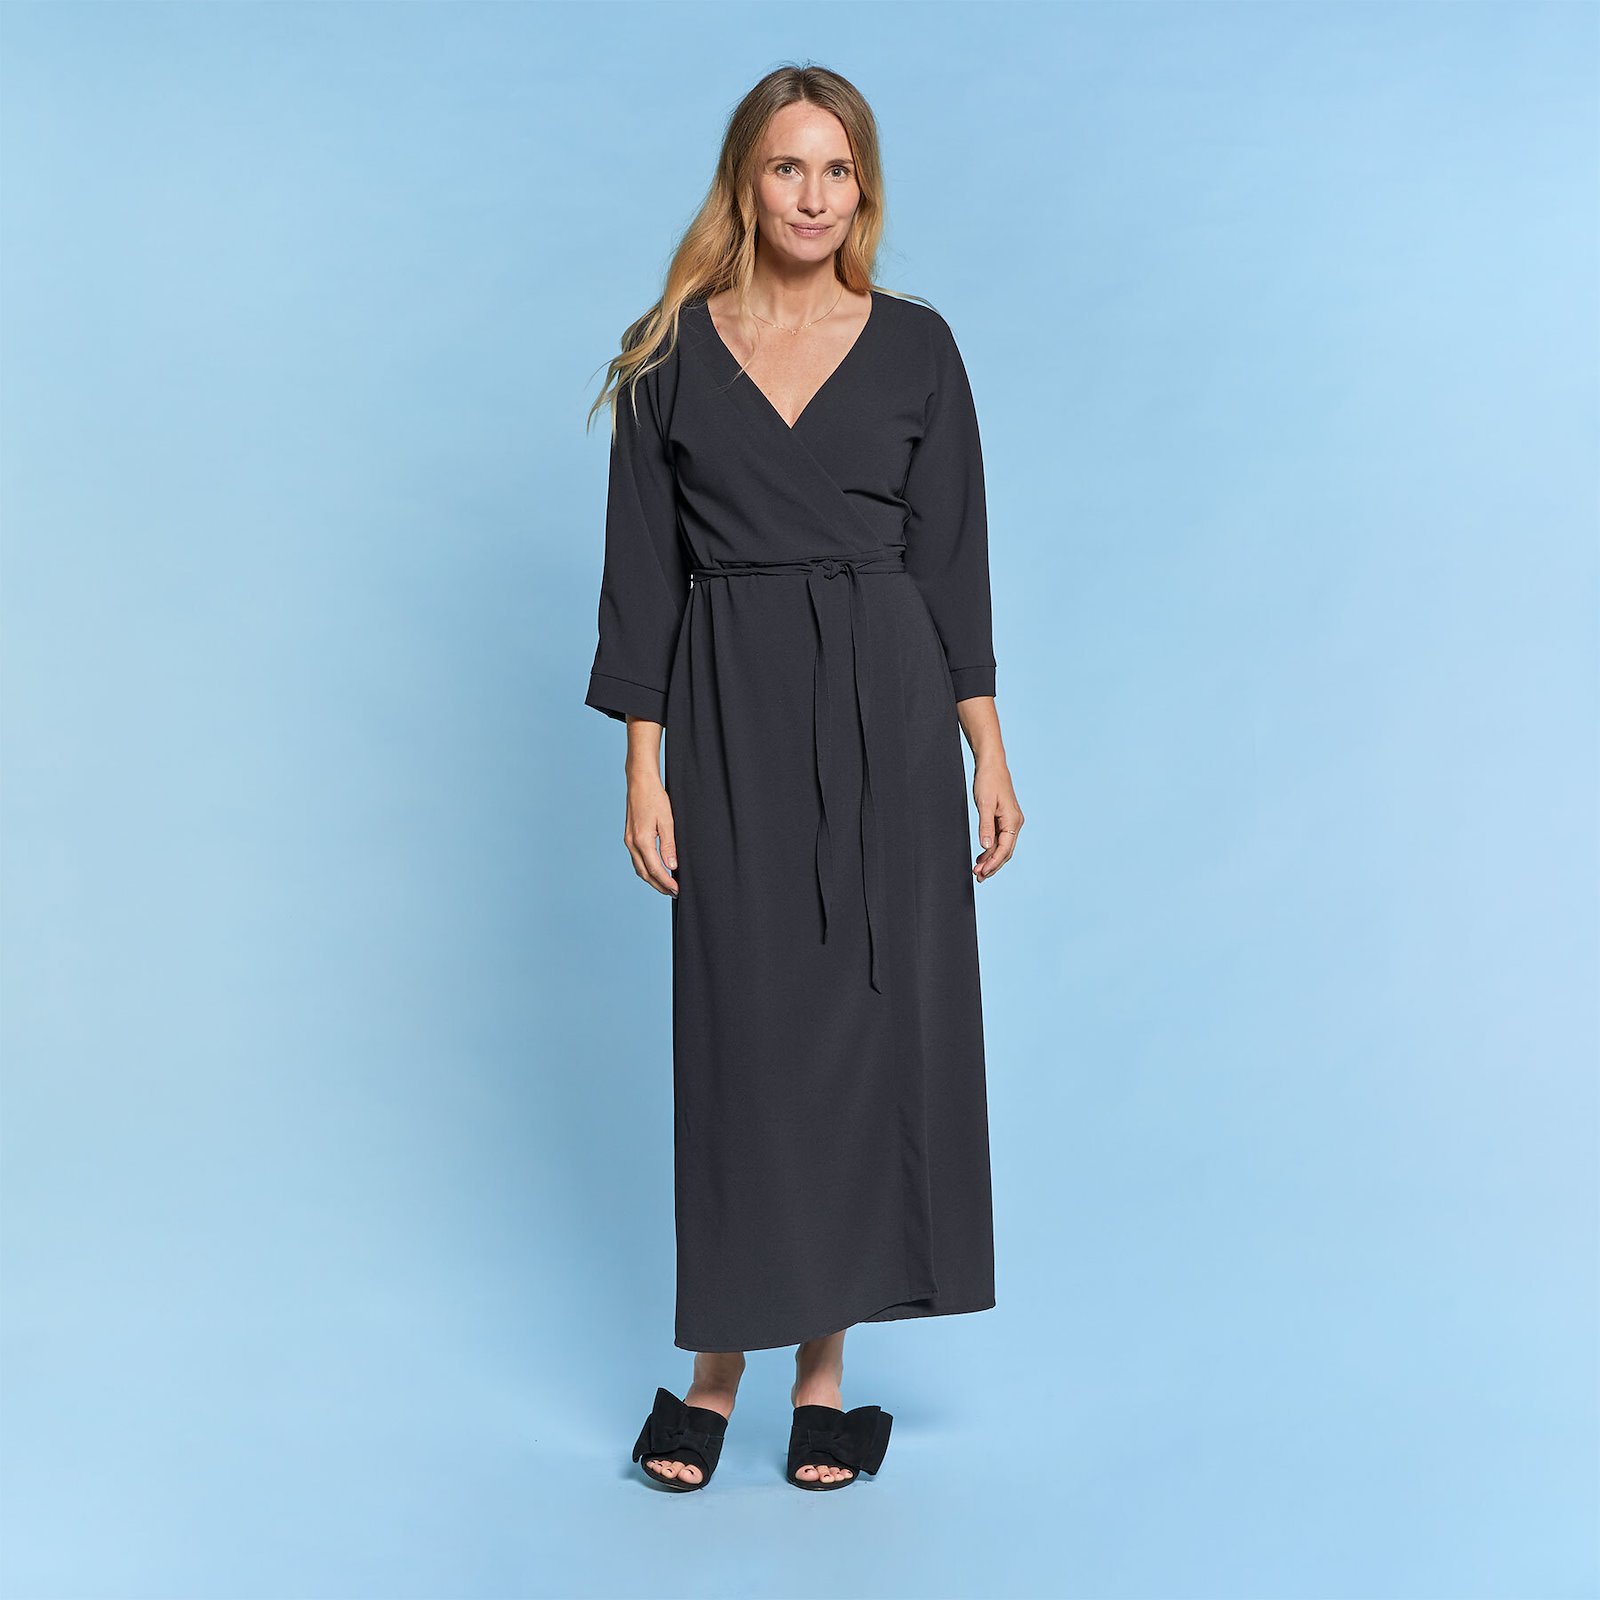 Wrap dress with batwing sleeves, 34/6 p23162000_p23162001_p23162002_p23162003_p23162004_pack_d